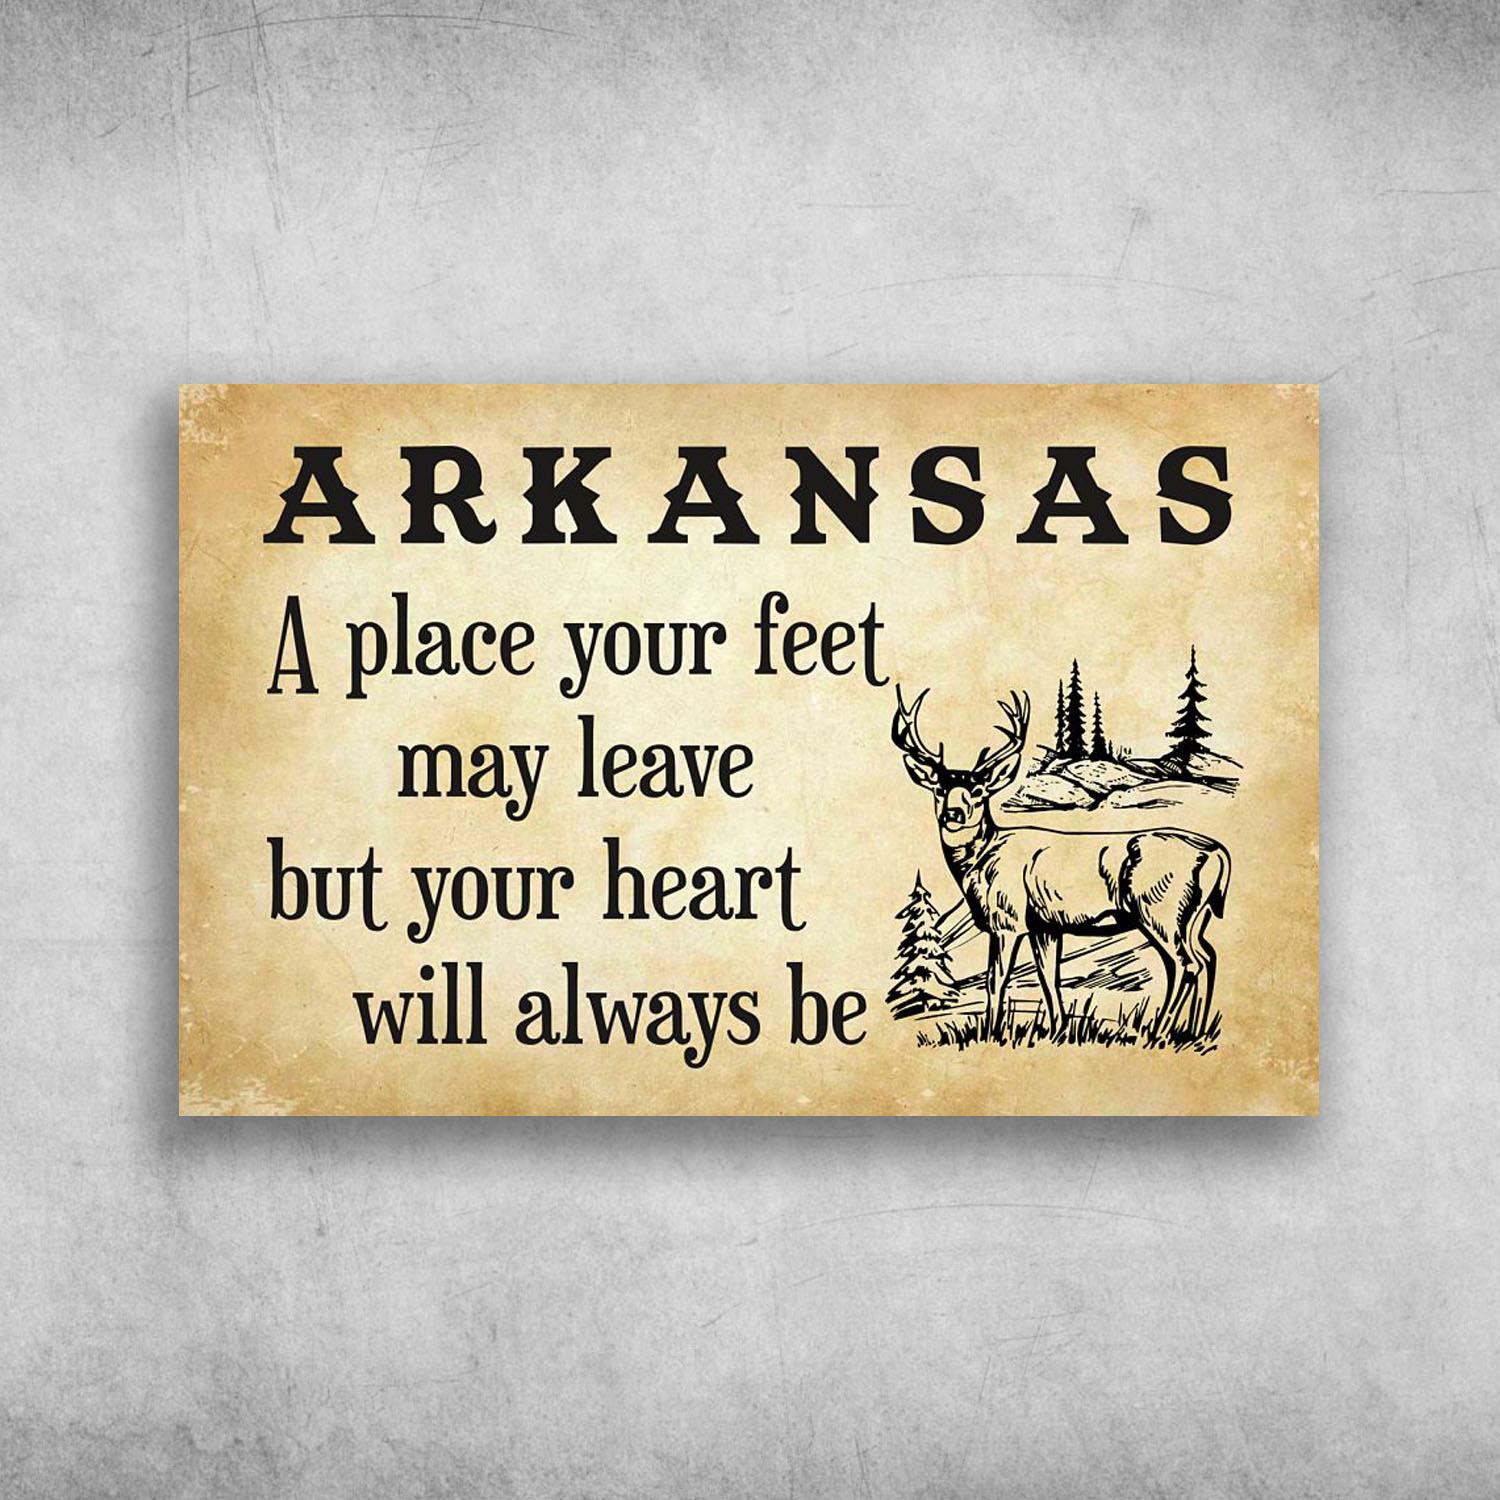 Arkansas A Place Your Feet May Leave